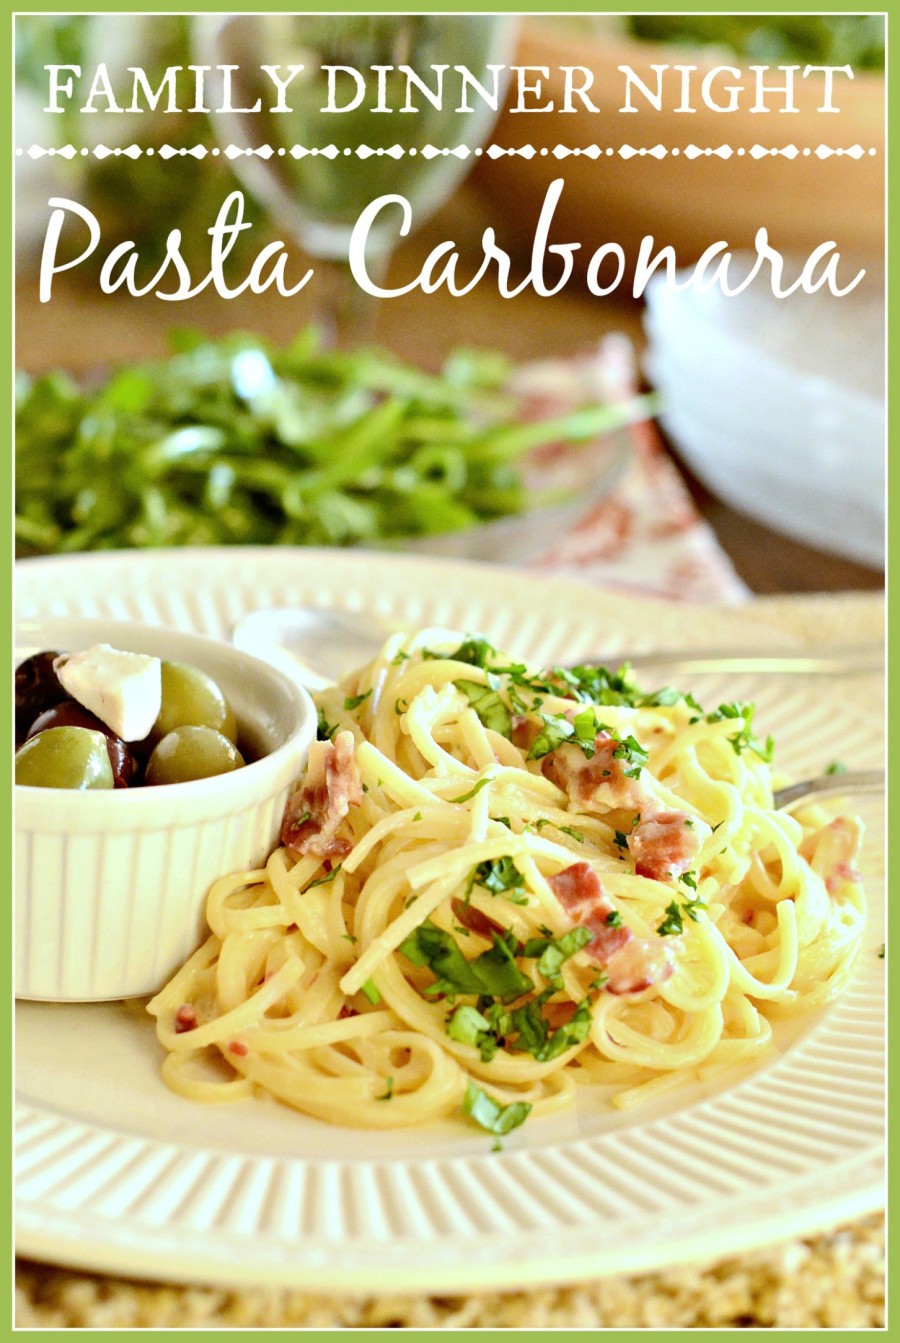 PASTA CARBONARA- A great meal you probably have in your pantry and frig-stonegableblog.com